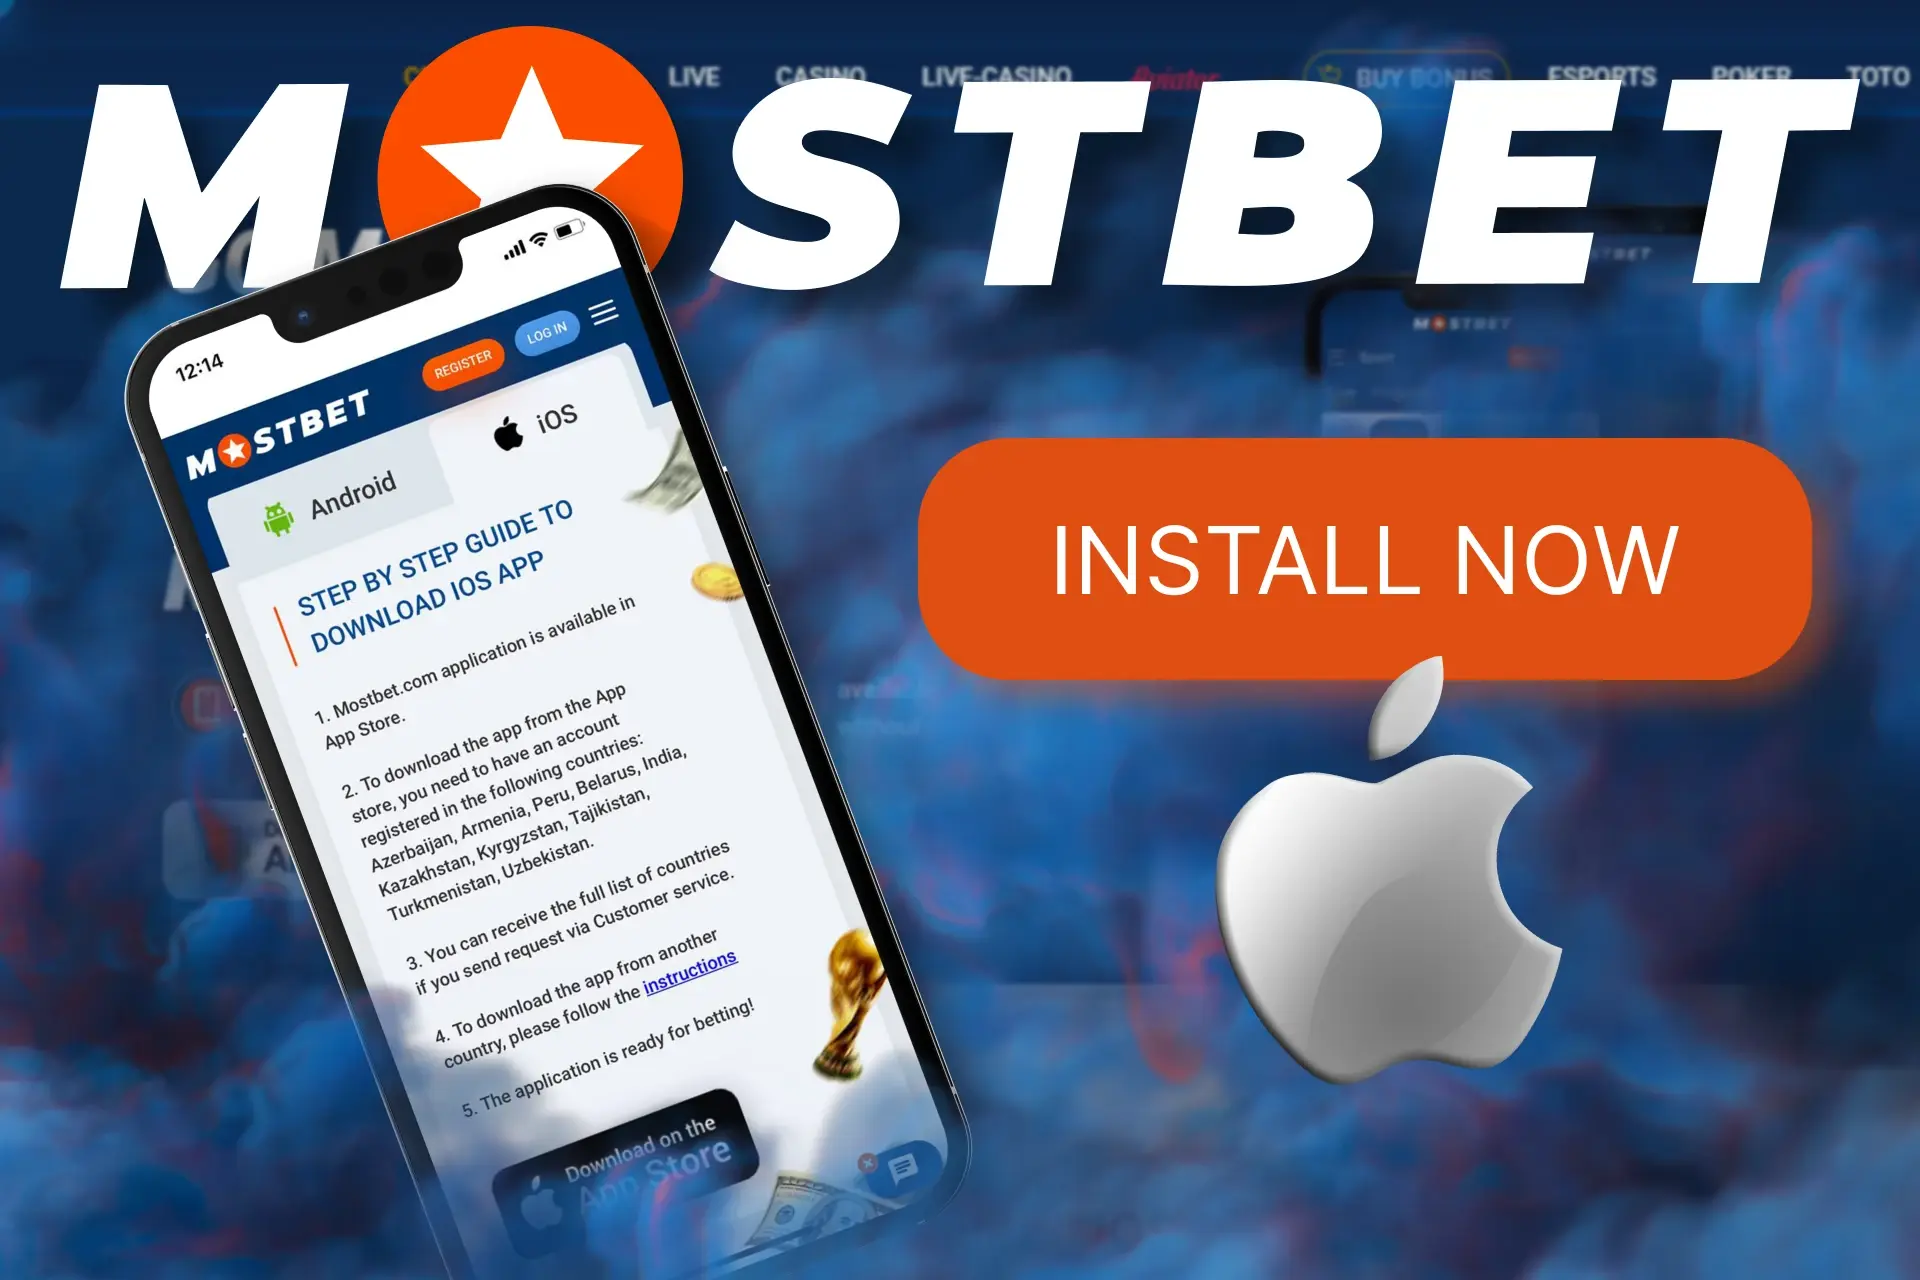 How to install the Mostbet app for iOS?